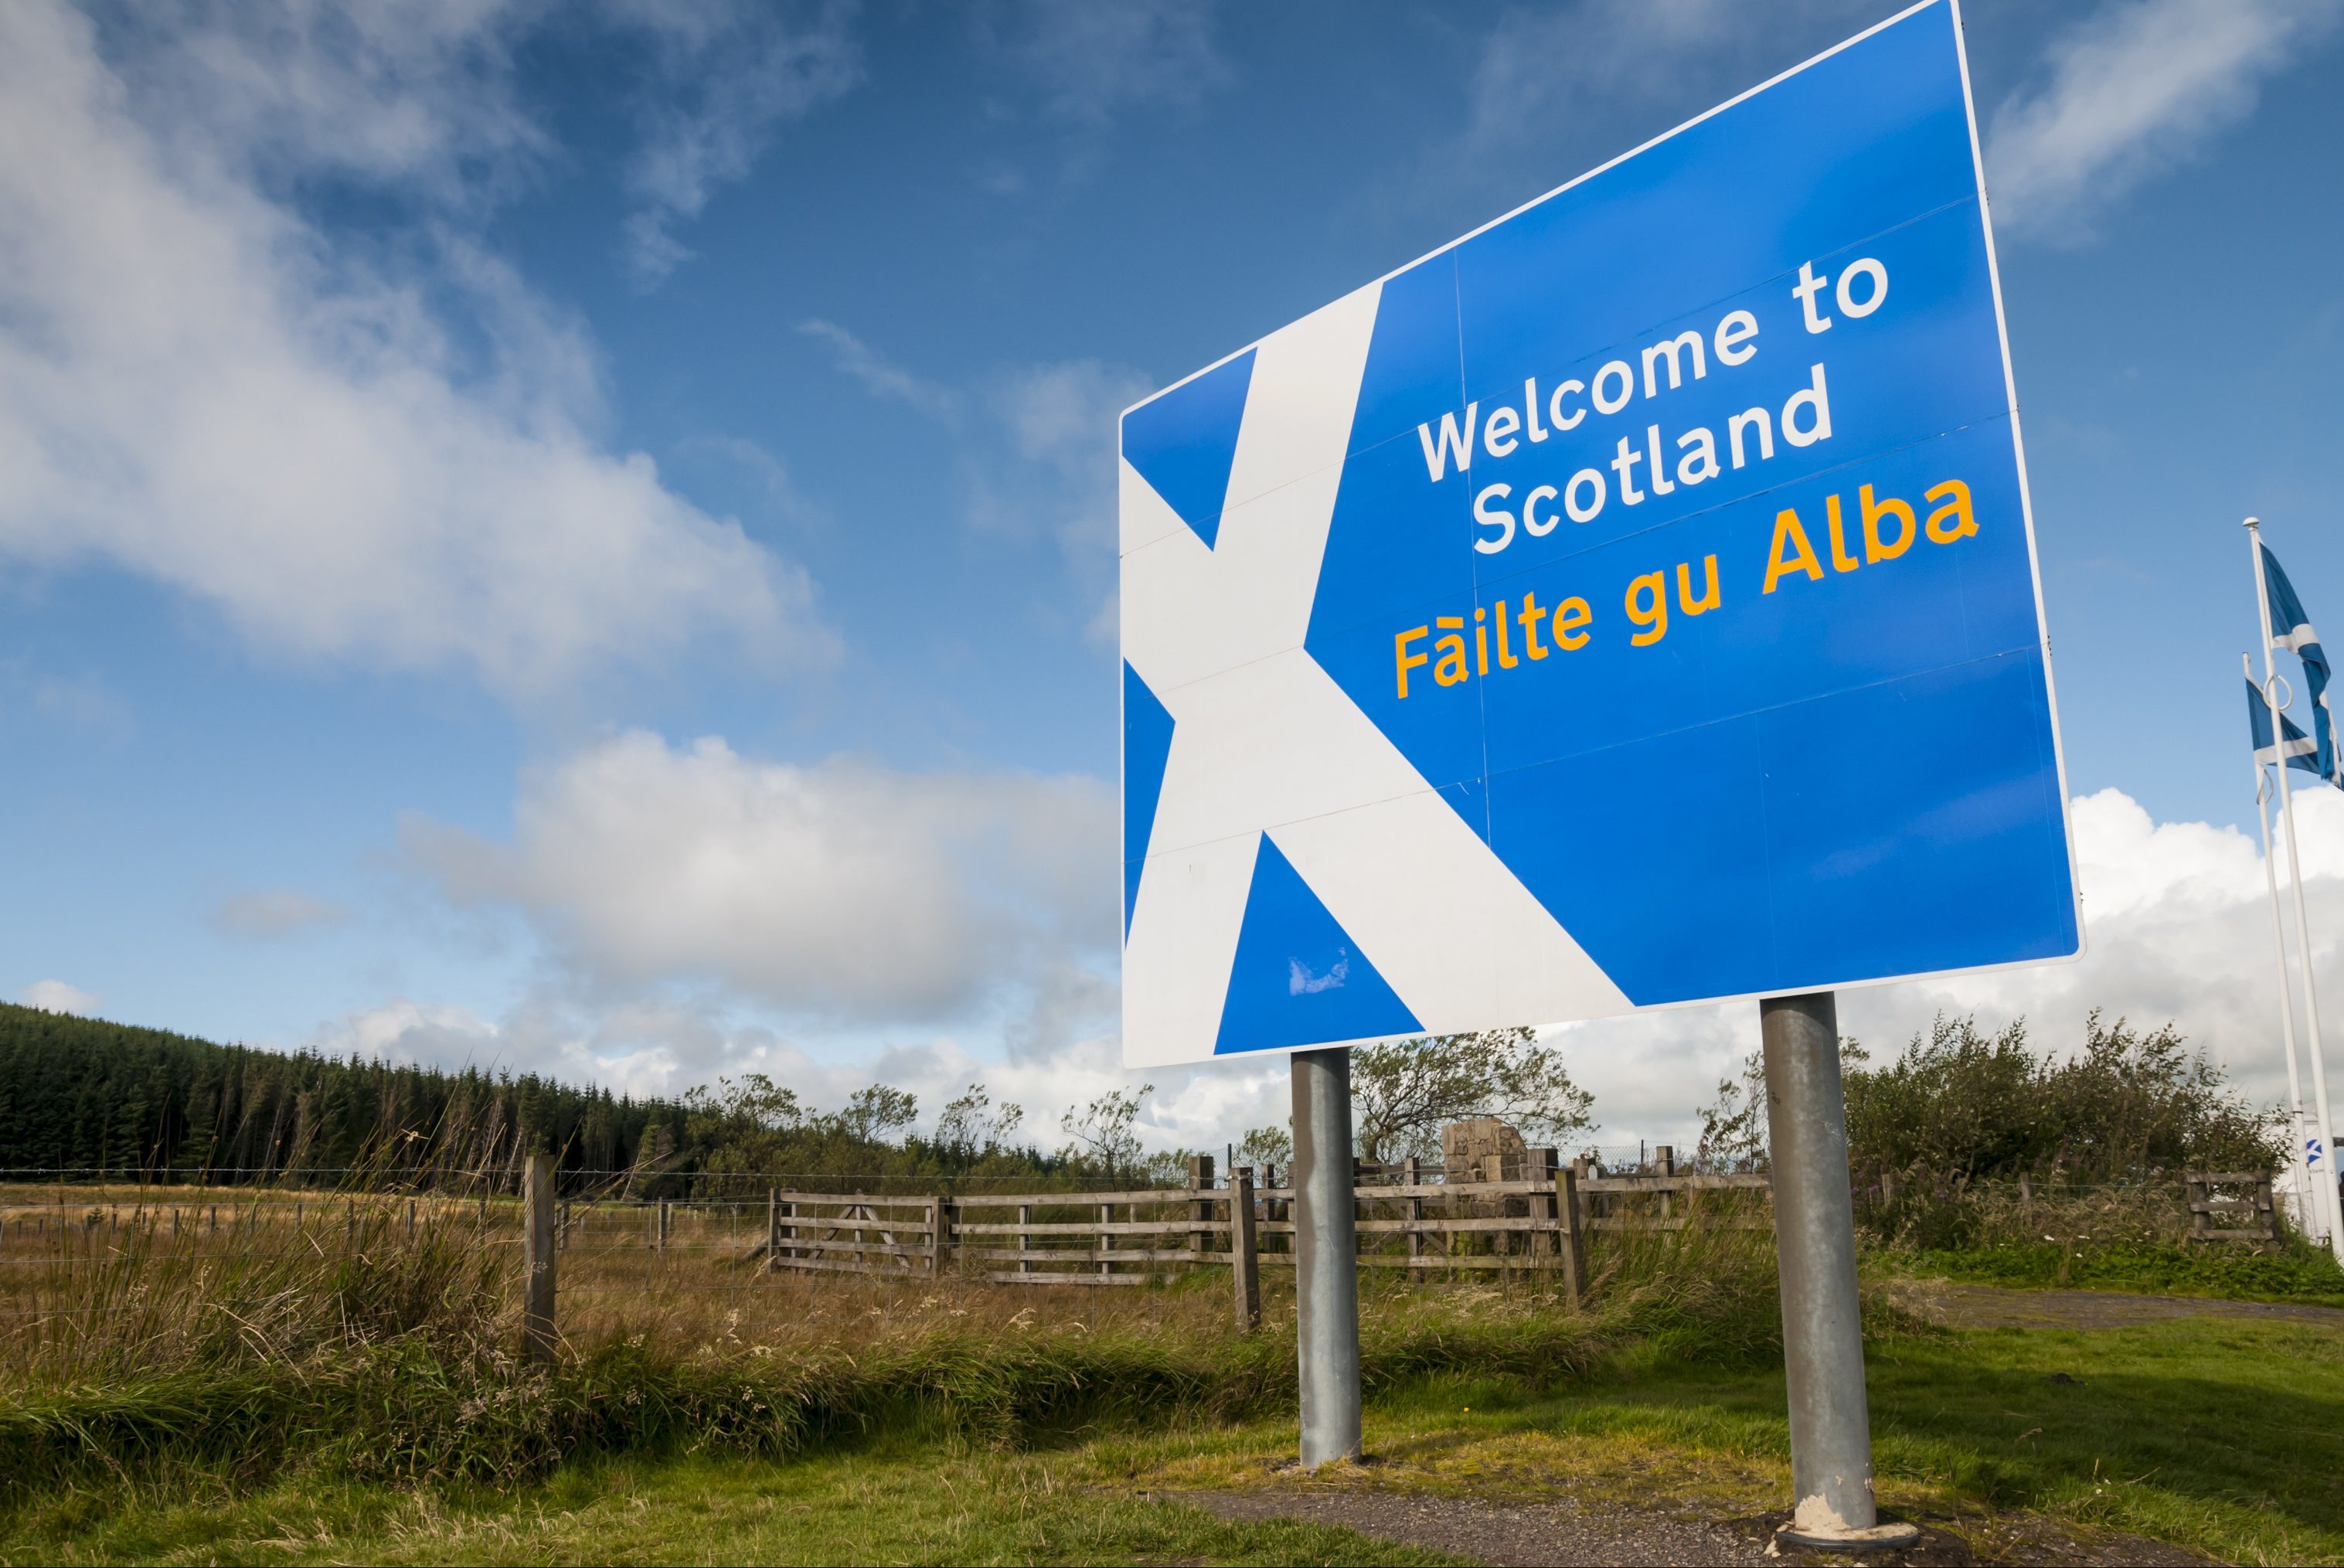 Welcome to Scotland sign at Scottish border.